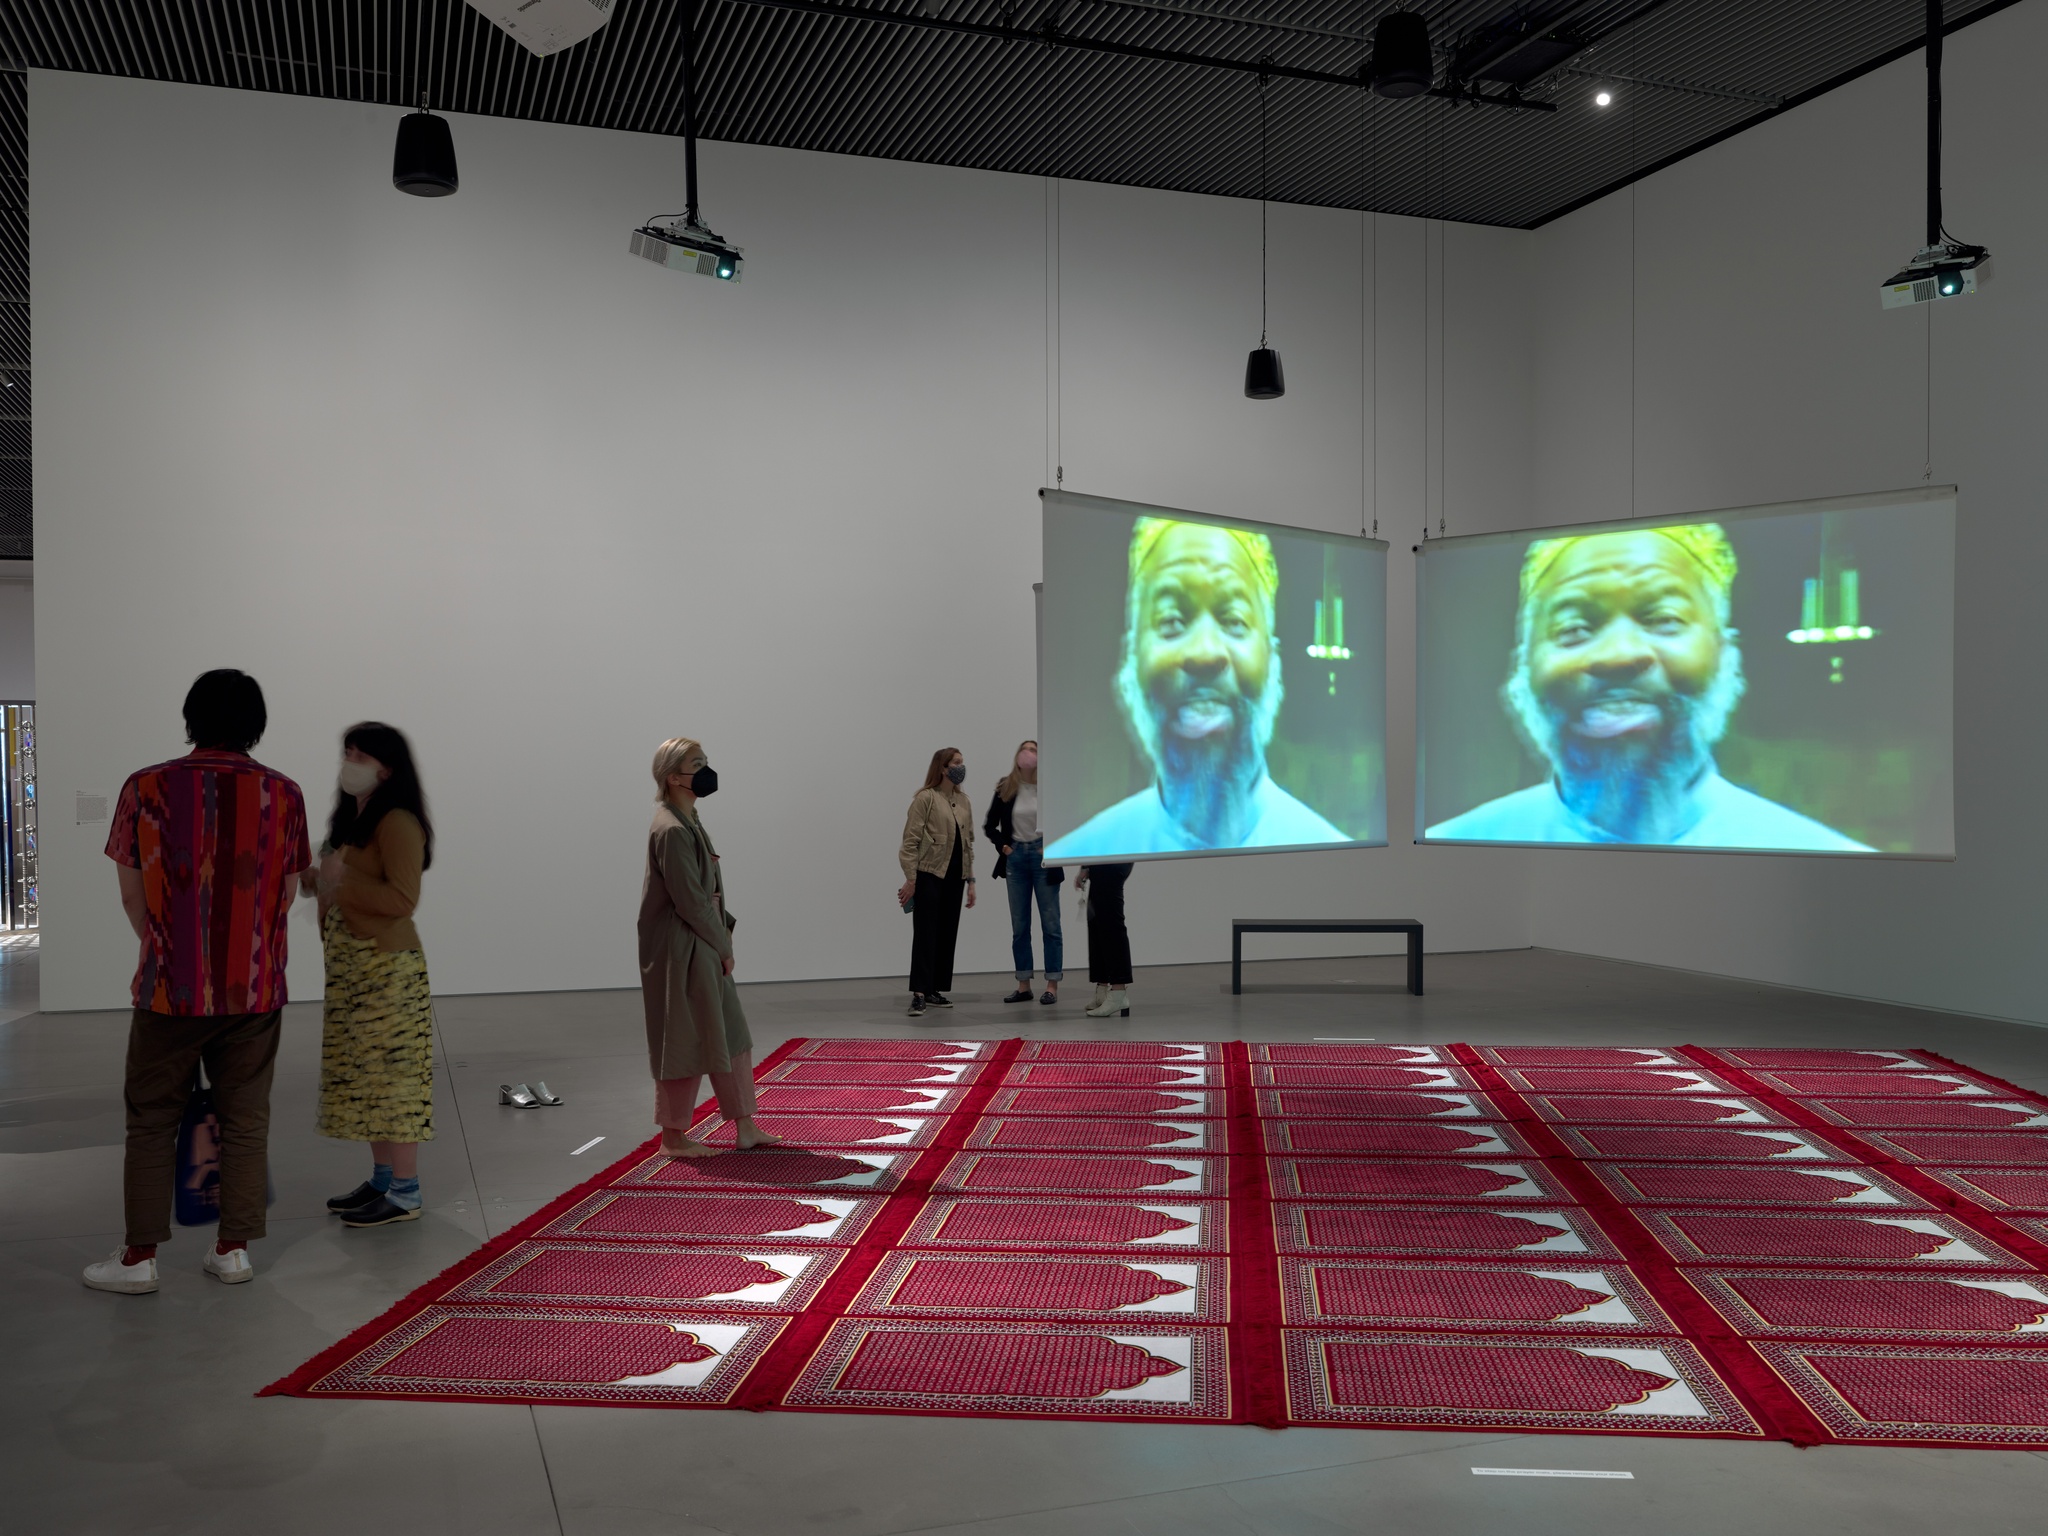 An installation in an art gallery comprised of red prayer rugs creating a rectangular space on the floor with two screens hanging over them with the same image of a man's face projected on them. Some people stand to the left of the rugs and one person steps onto them.